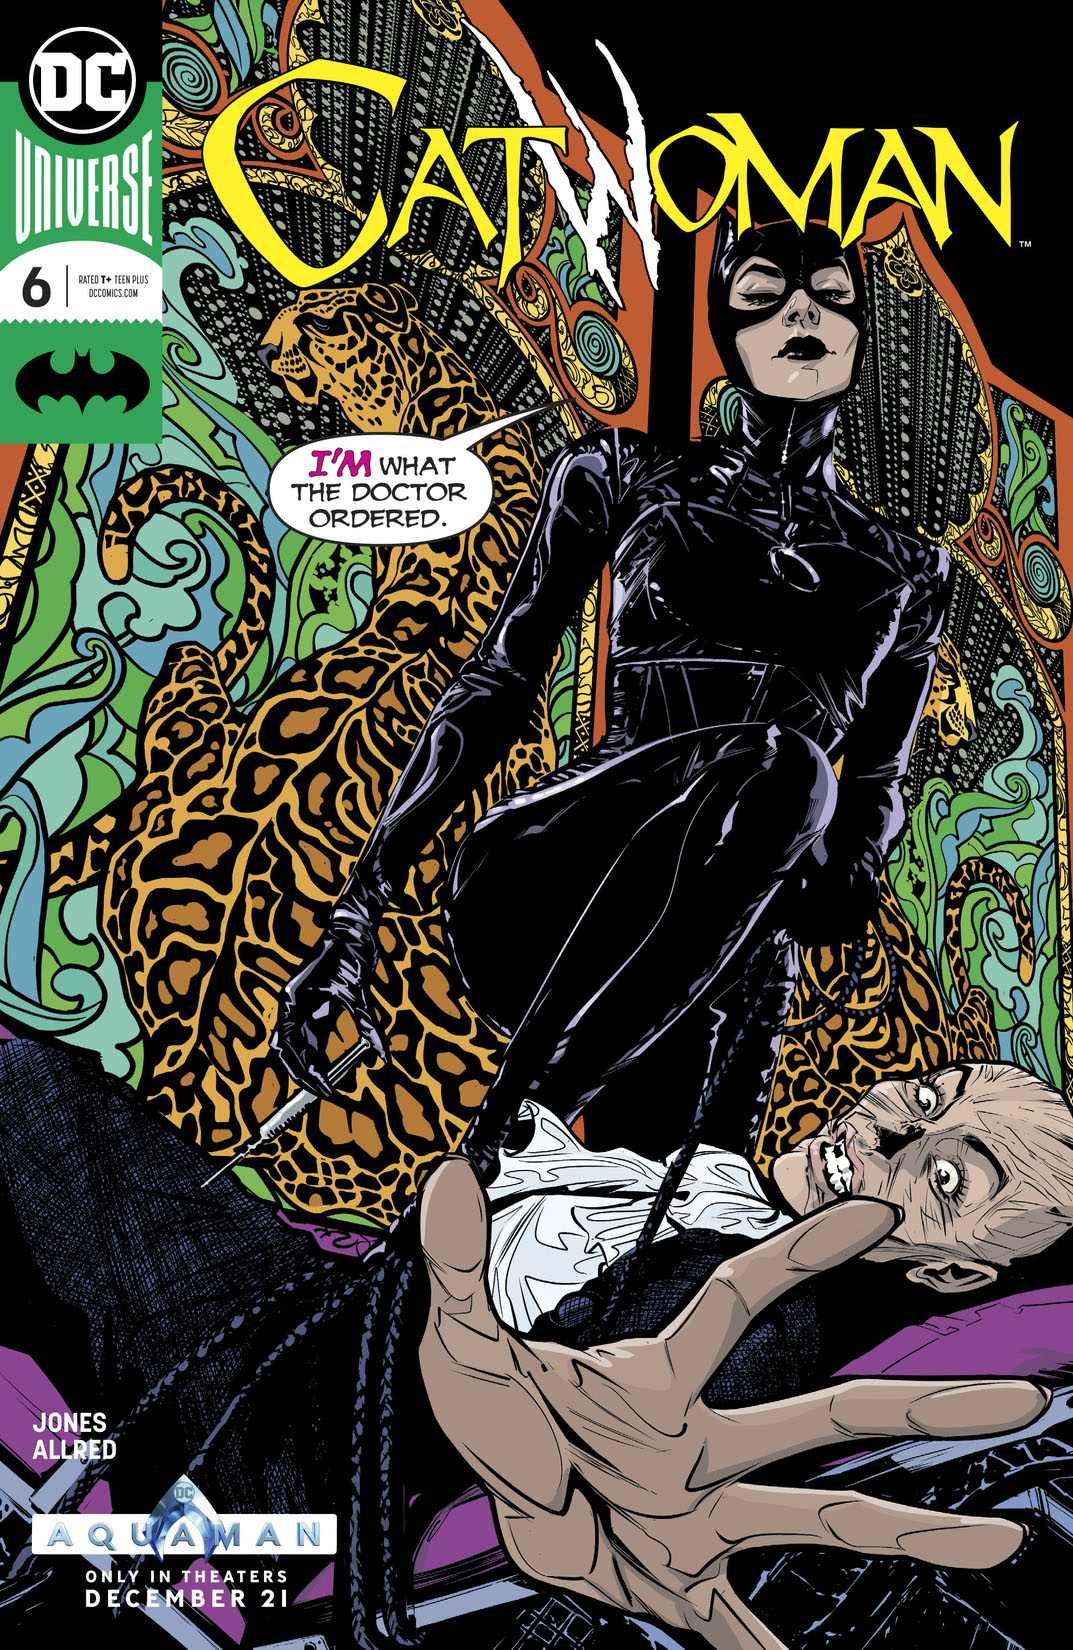 Catwoman (2018-) #6 preview images